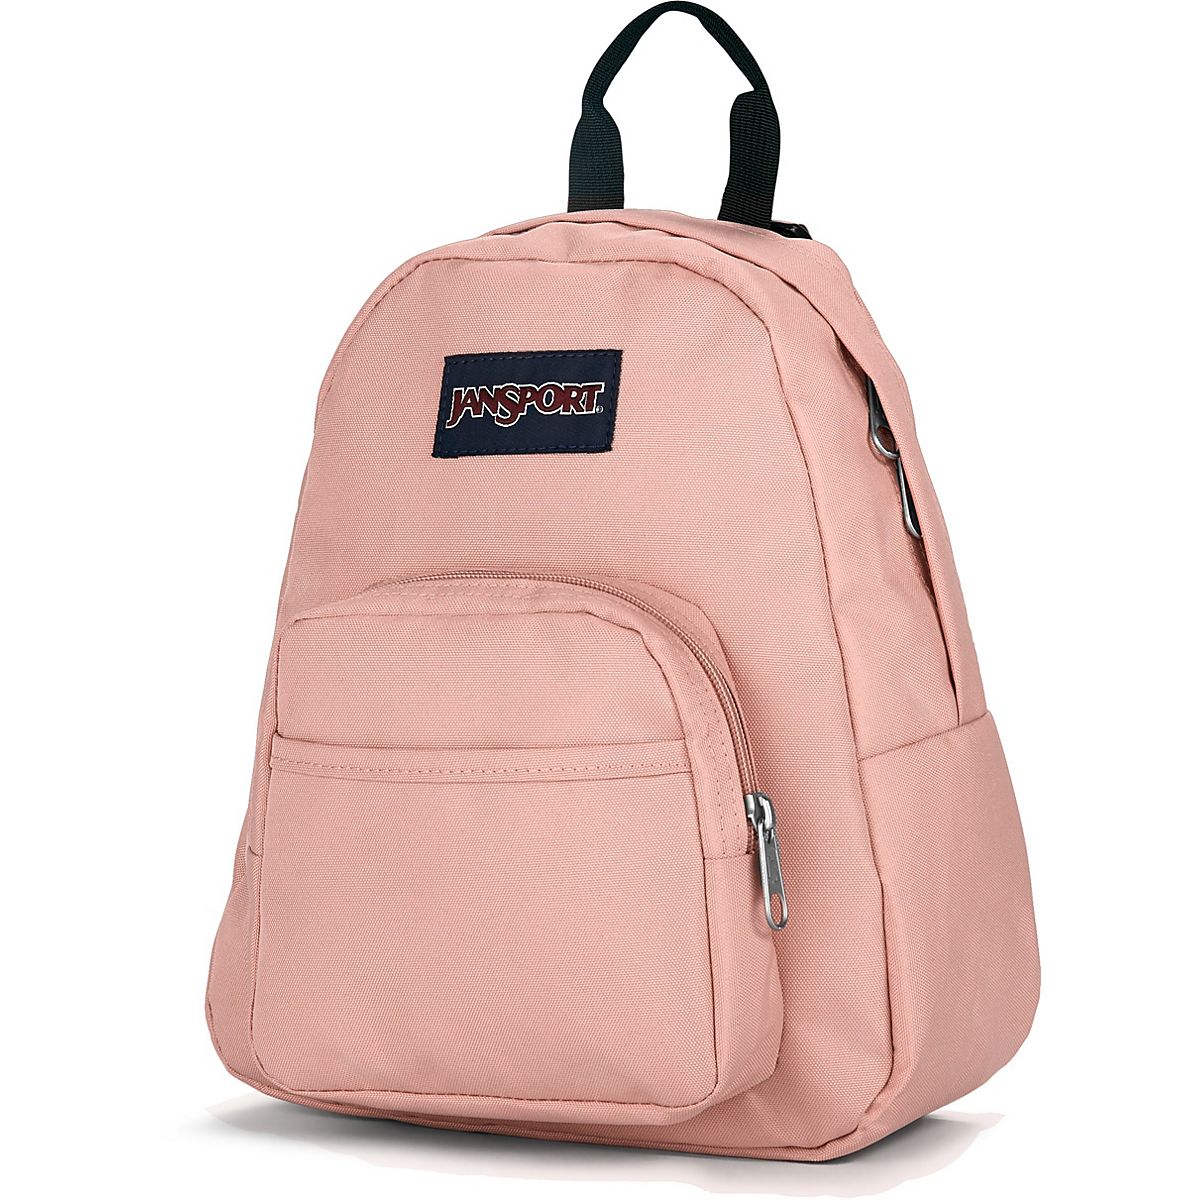 JanSport Half Pint Mini Backpack | Free Shipping at Academy